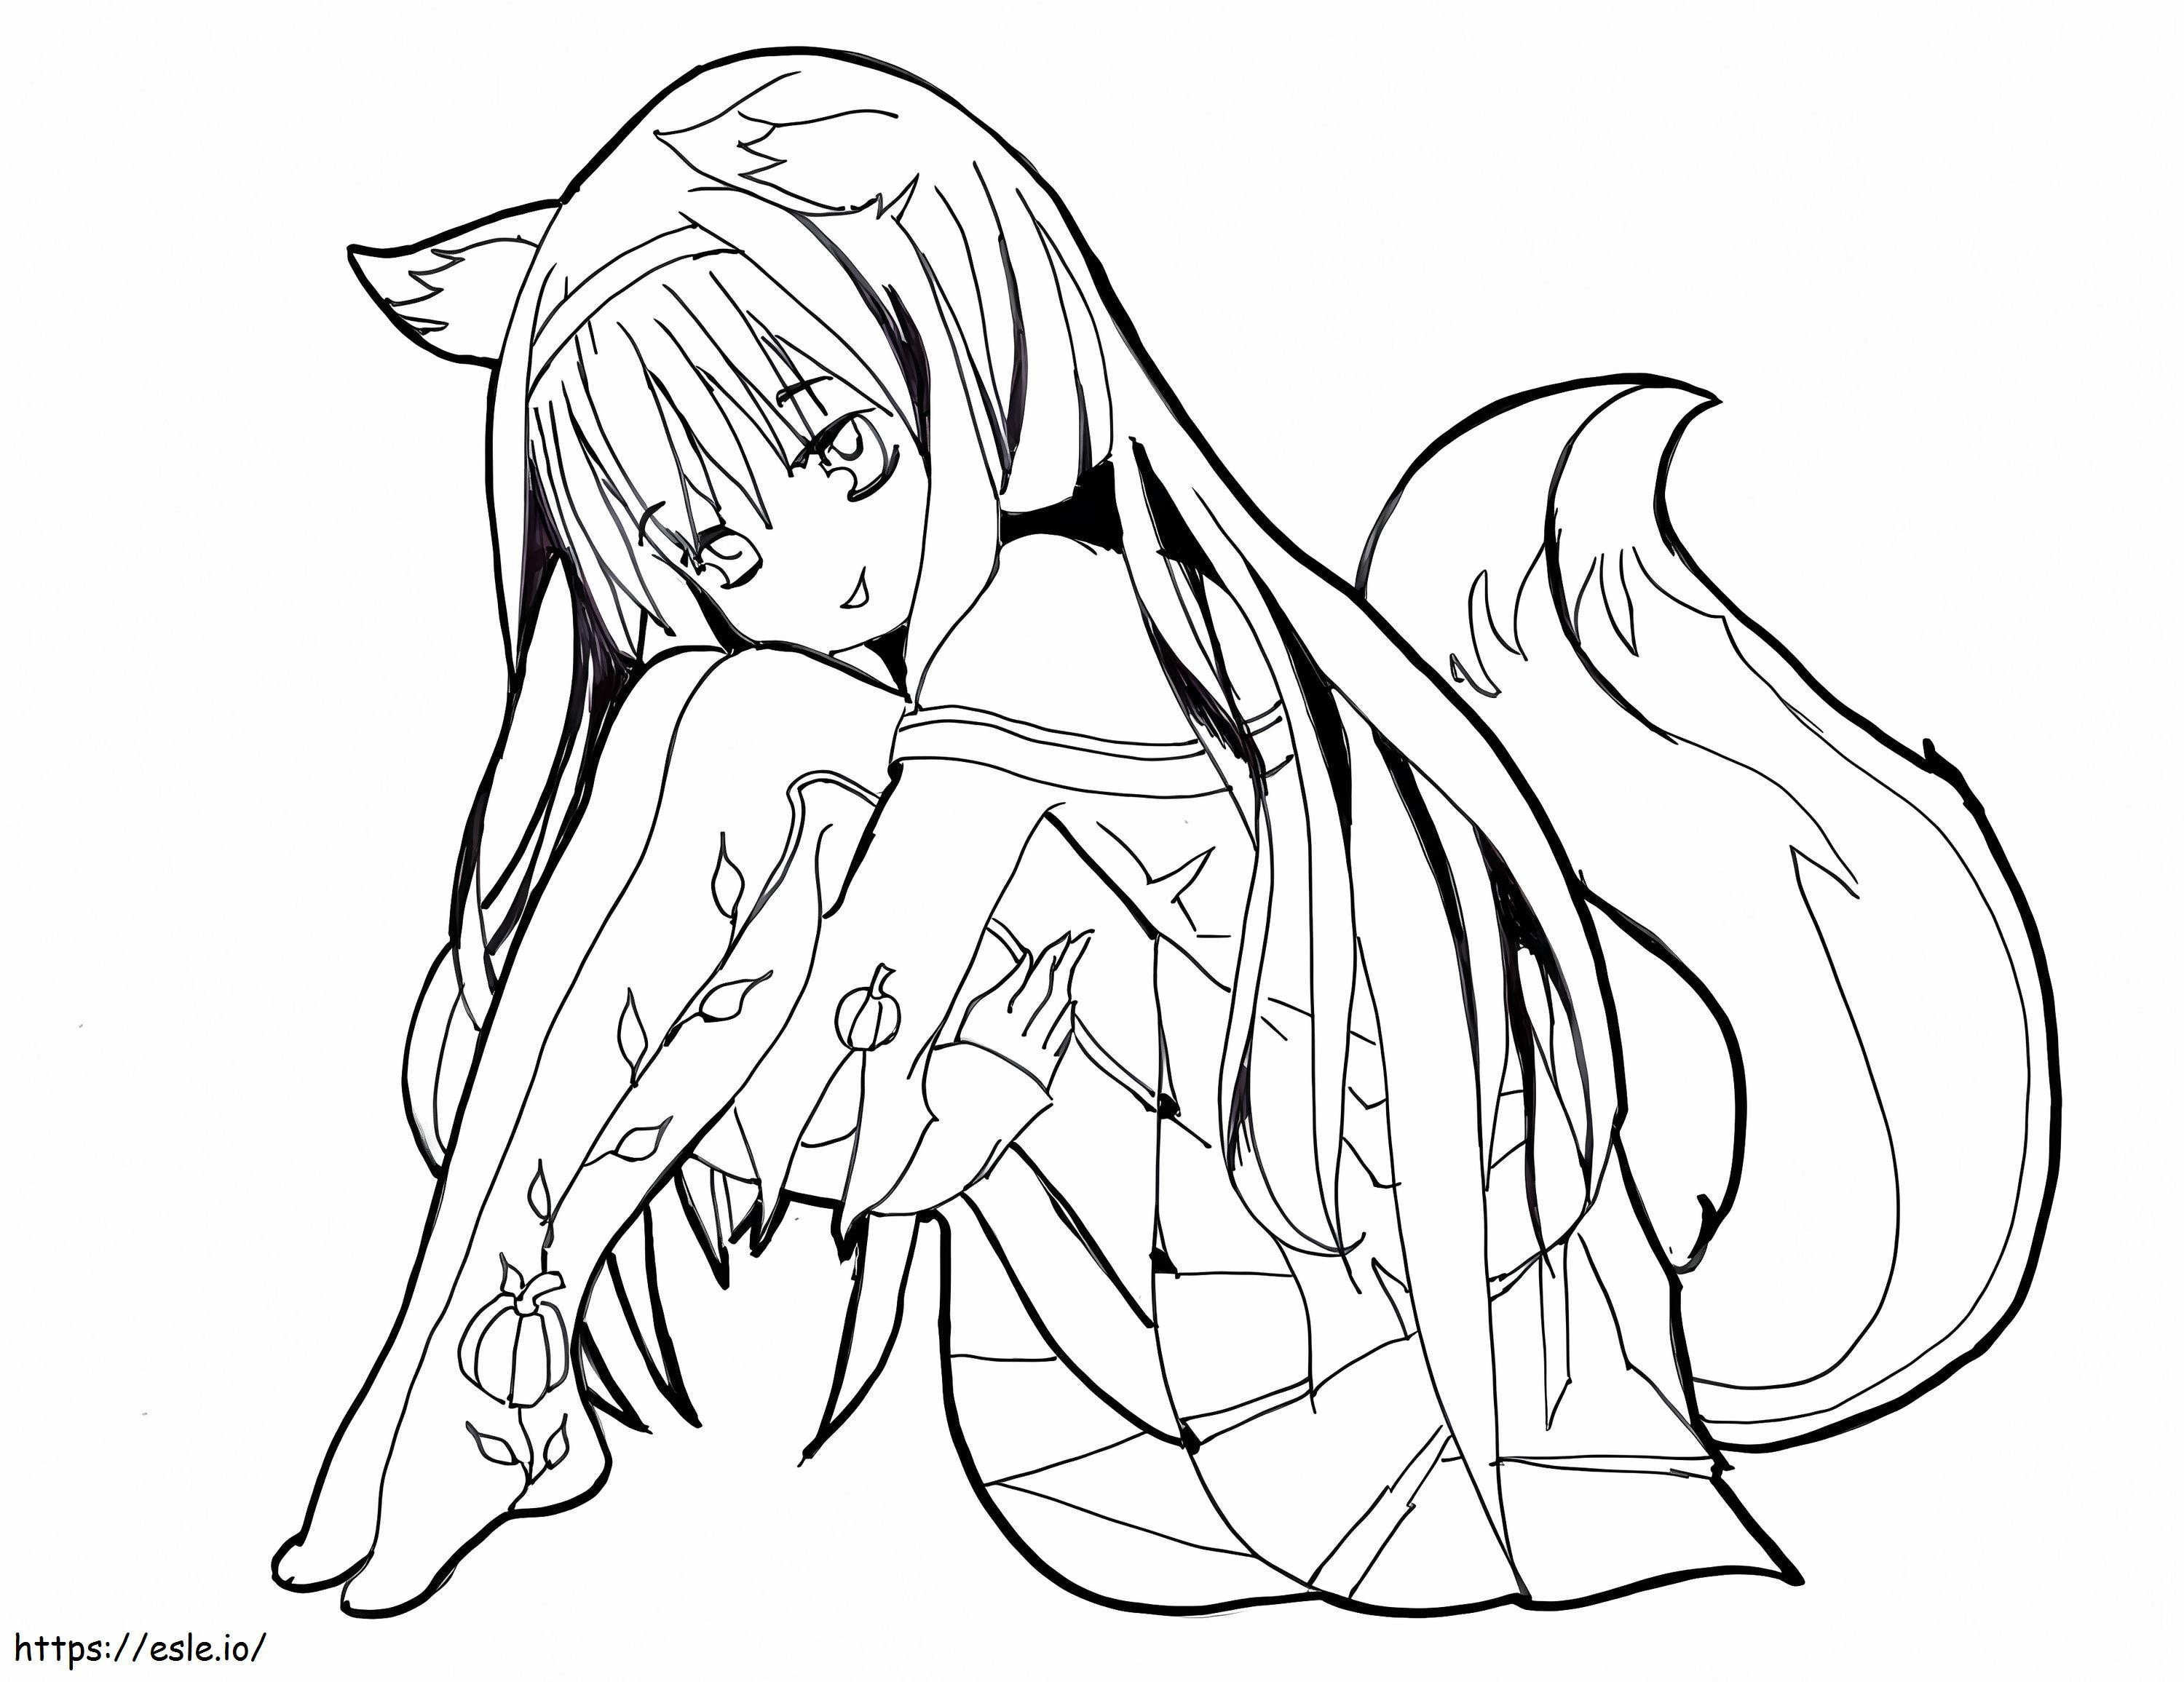 Cute Wolf Girl Coloring Page coloring page